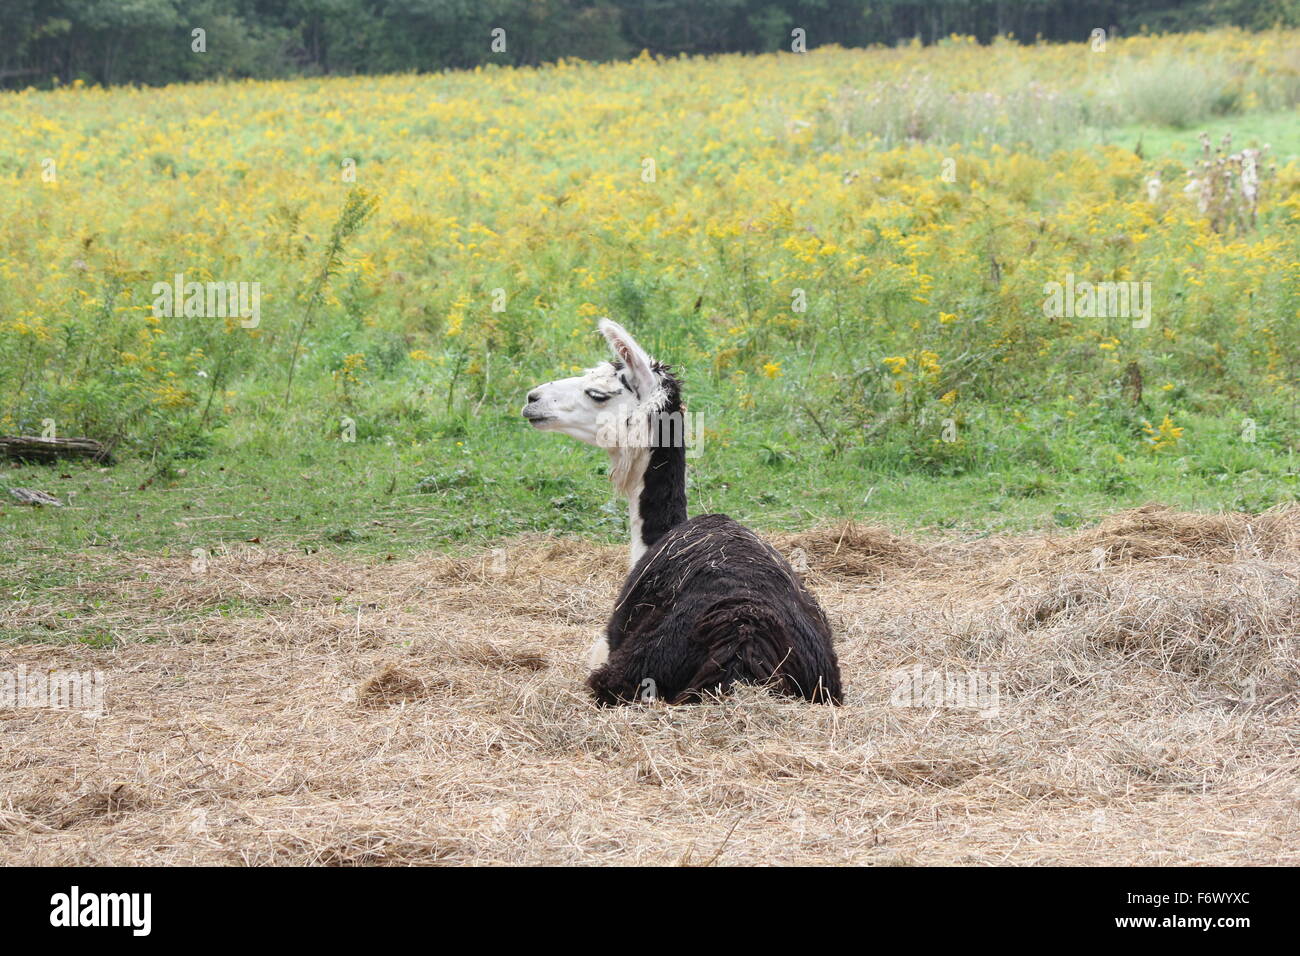 Llama on a small hobby farm, laying on a pile of straw.  The Llama is a domesticated South American camelid, Stock Photo